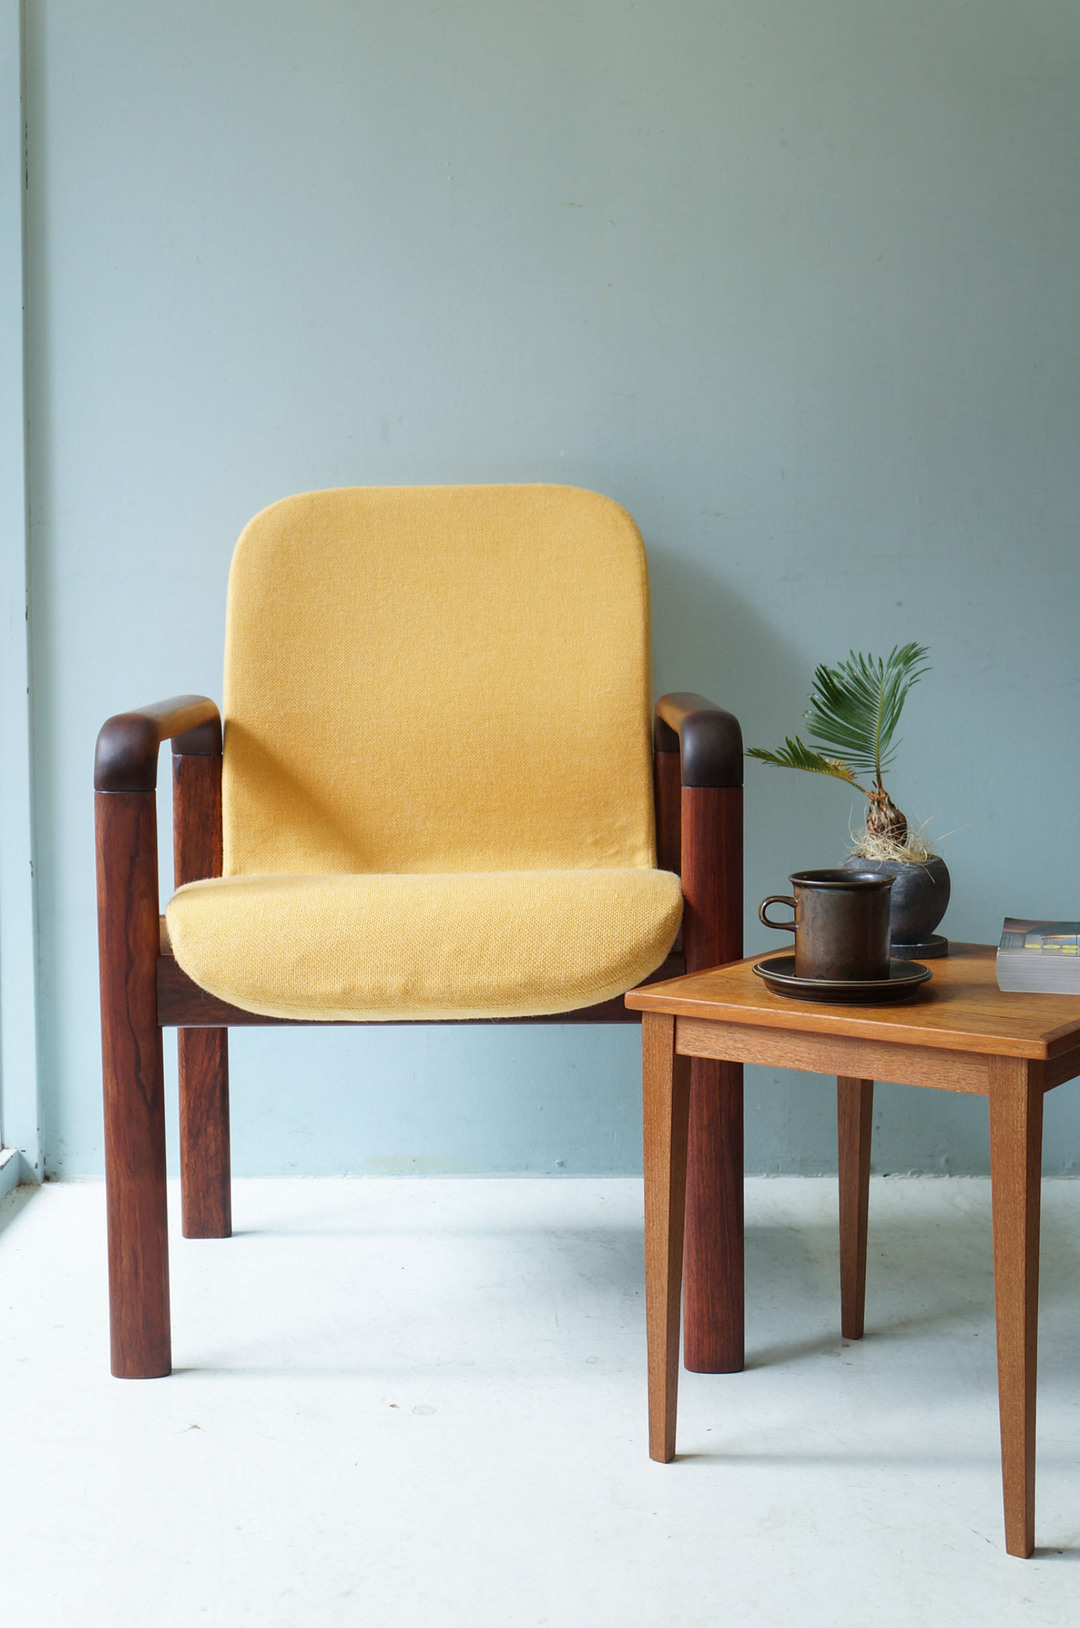 Danish Vintage Dyrlund Arm Chair/デンマーク ヴィンテージ デューロン アームチェア 北欧家具 イエロー